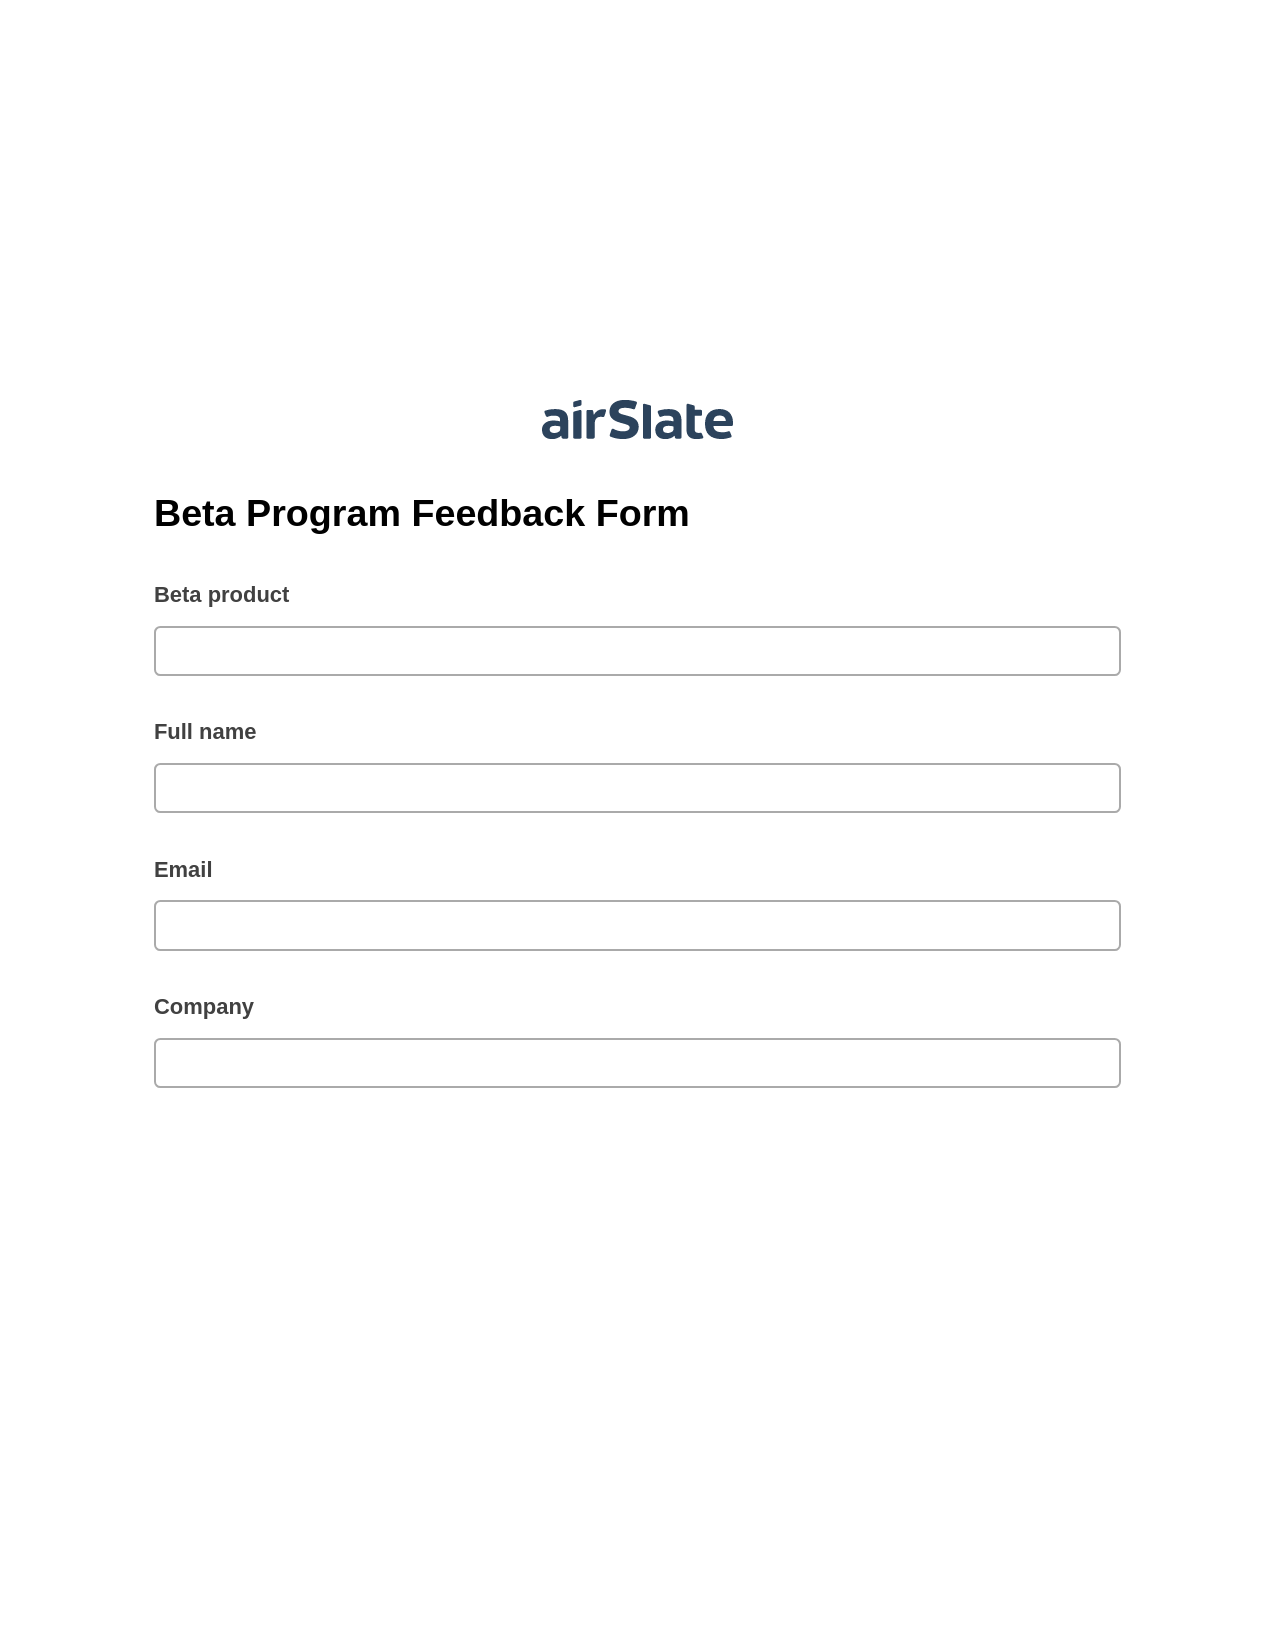 Multirole Beta Program Feedback Form Pre-fill from Google Sheets Bot, Add Tags to Slate Bot, Post-finish Document Bot